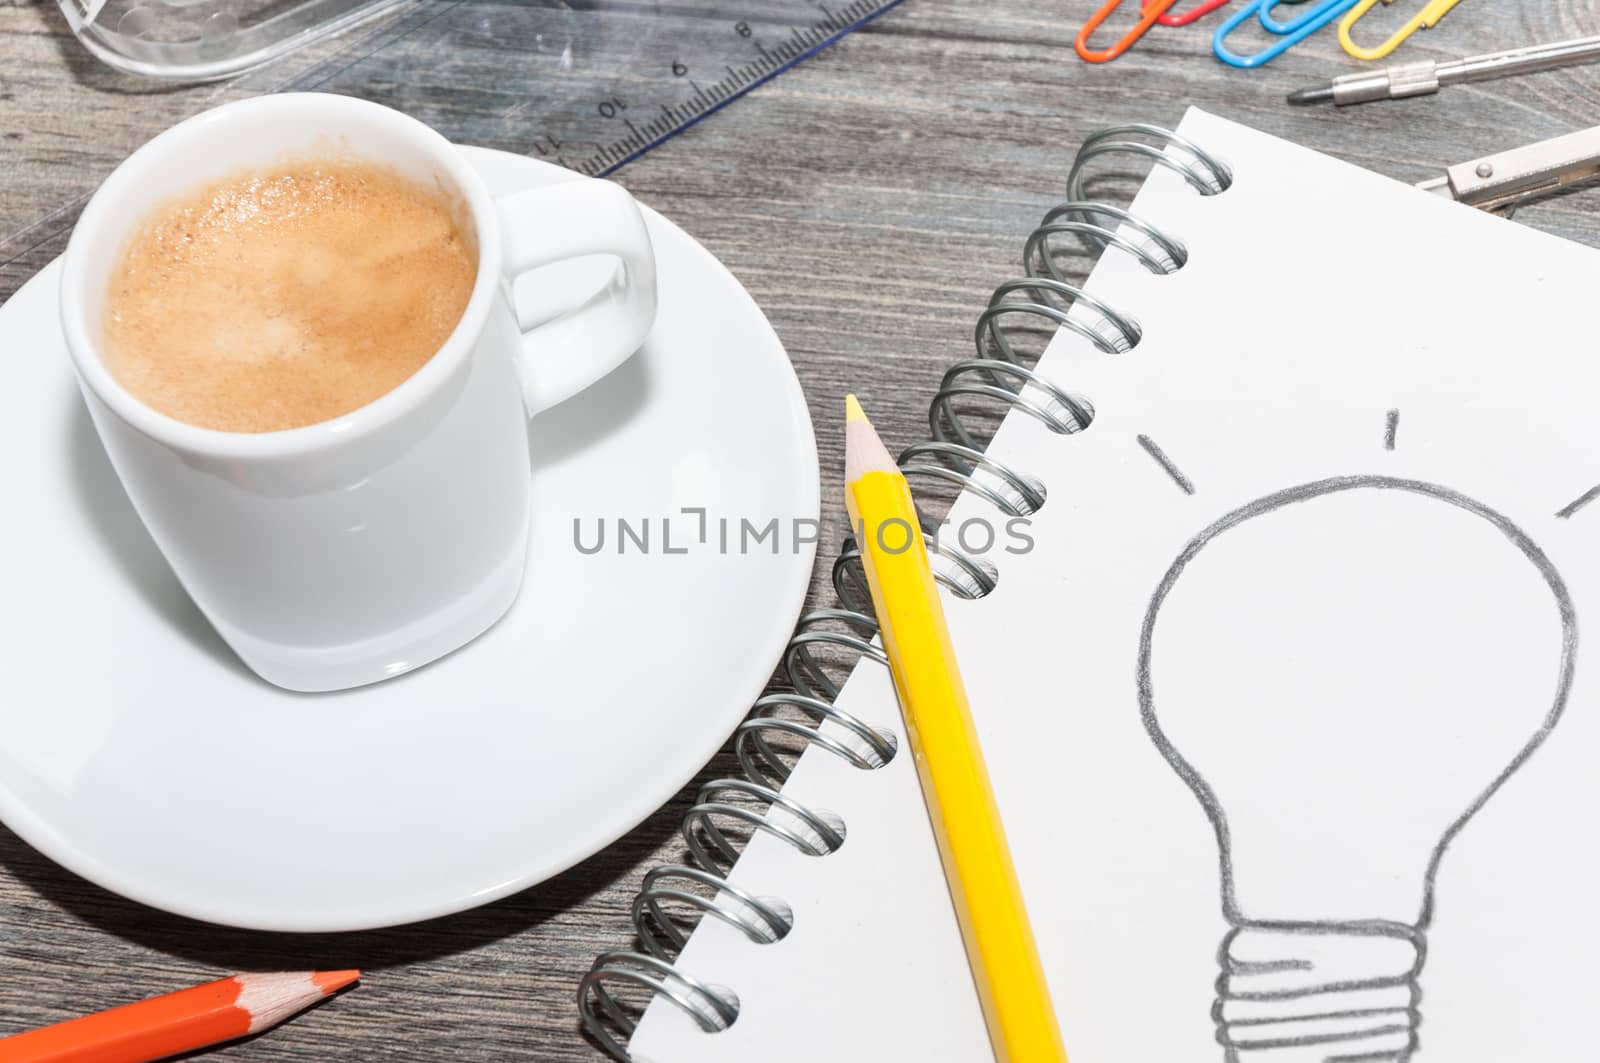 Office supplies, an open book with a drawing of a light bulb and a coffee